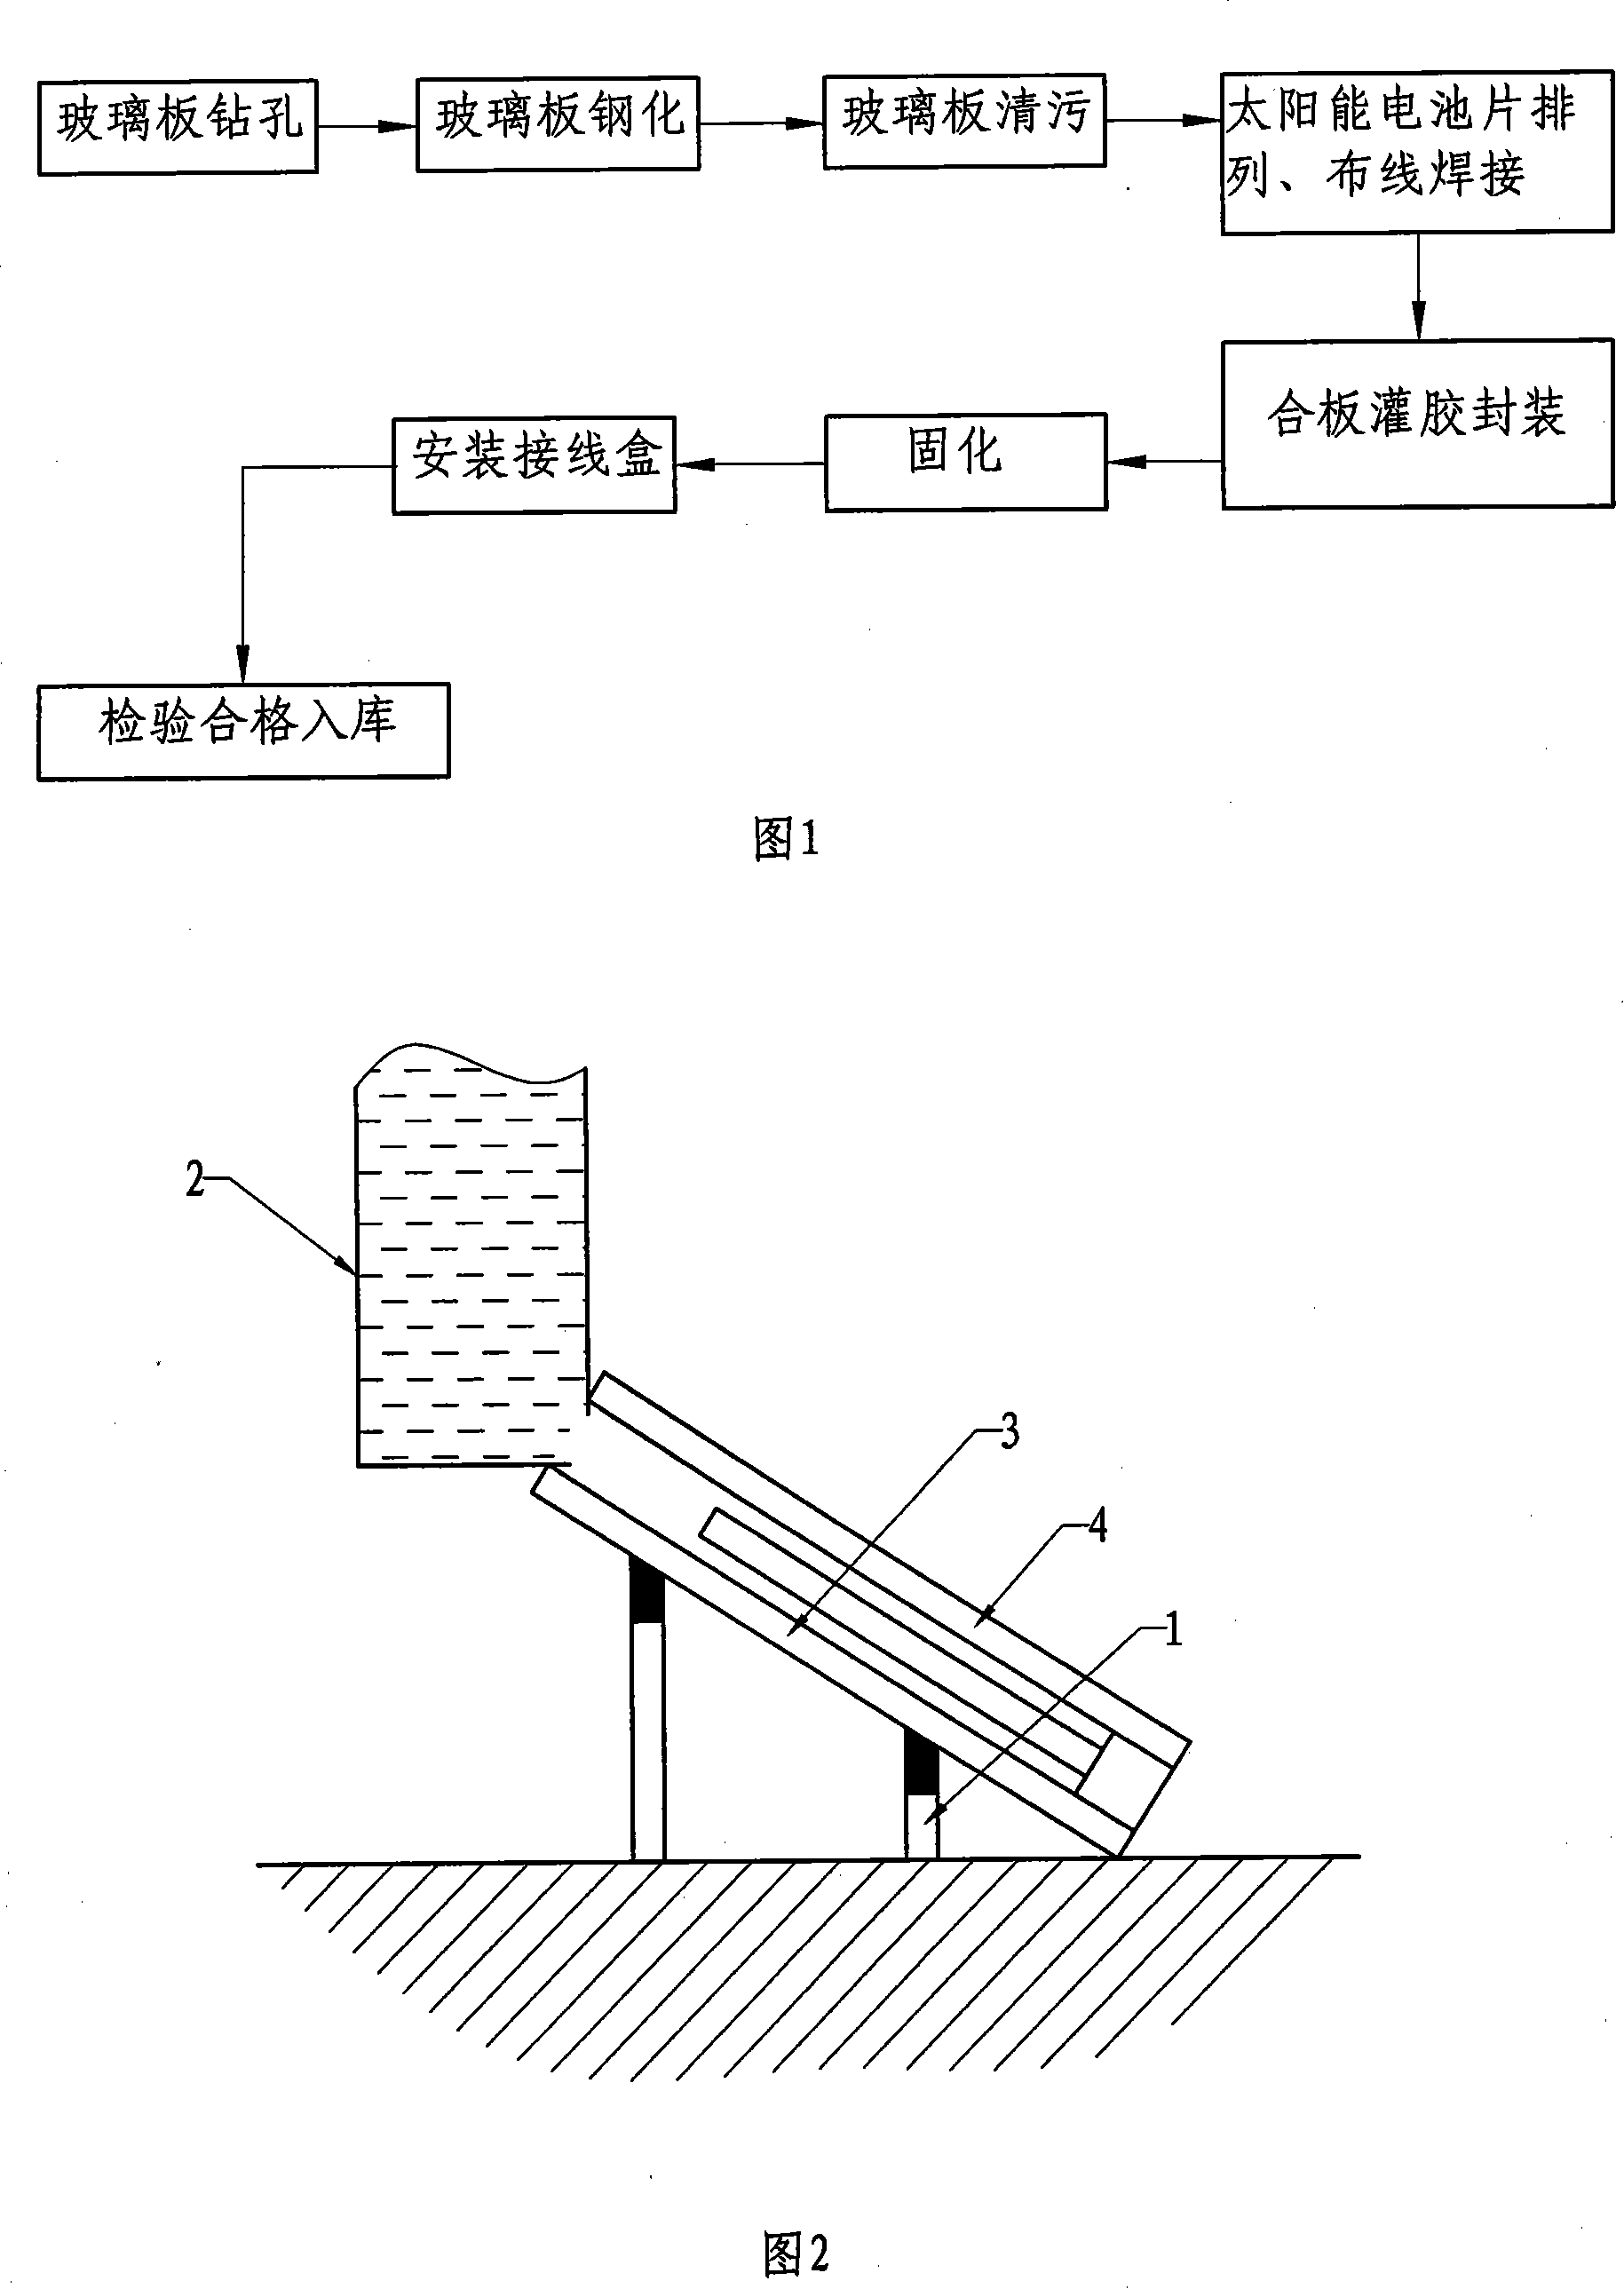 Manufacturing method for solar optoelectronic glass curtain wall